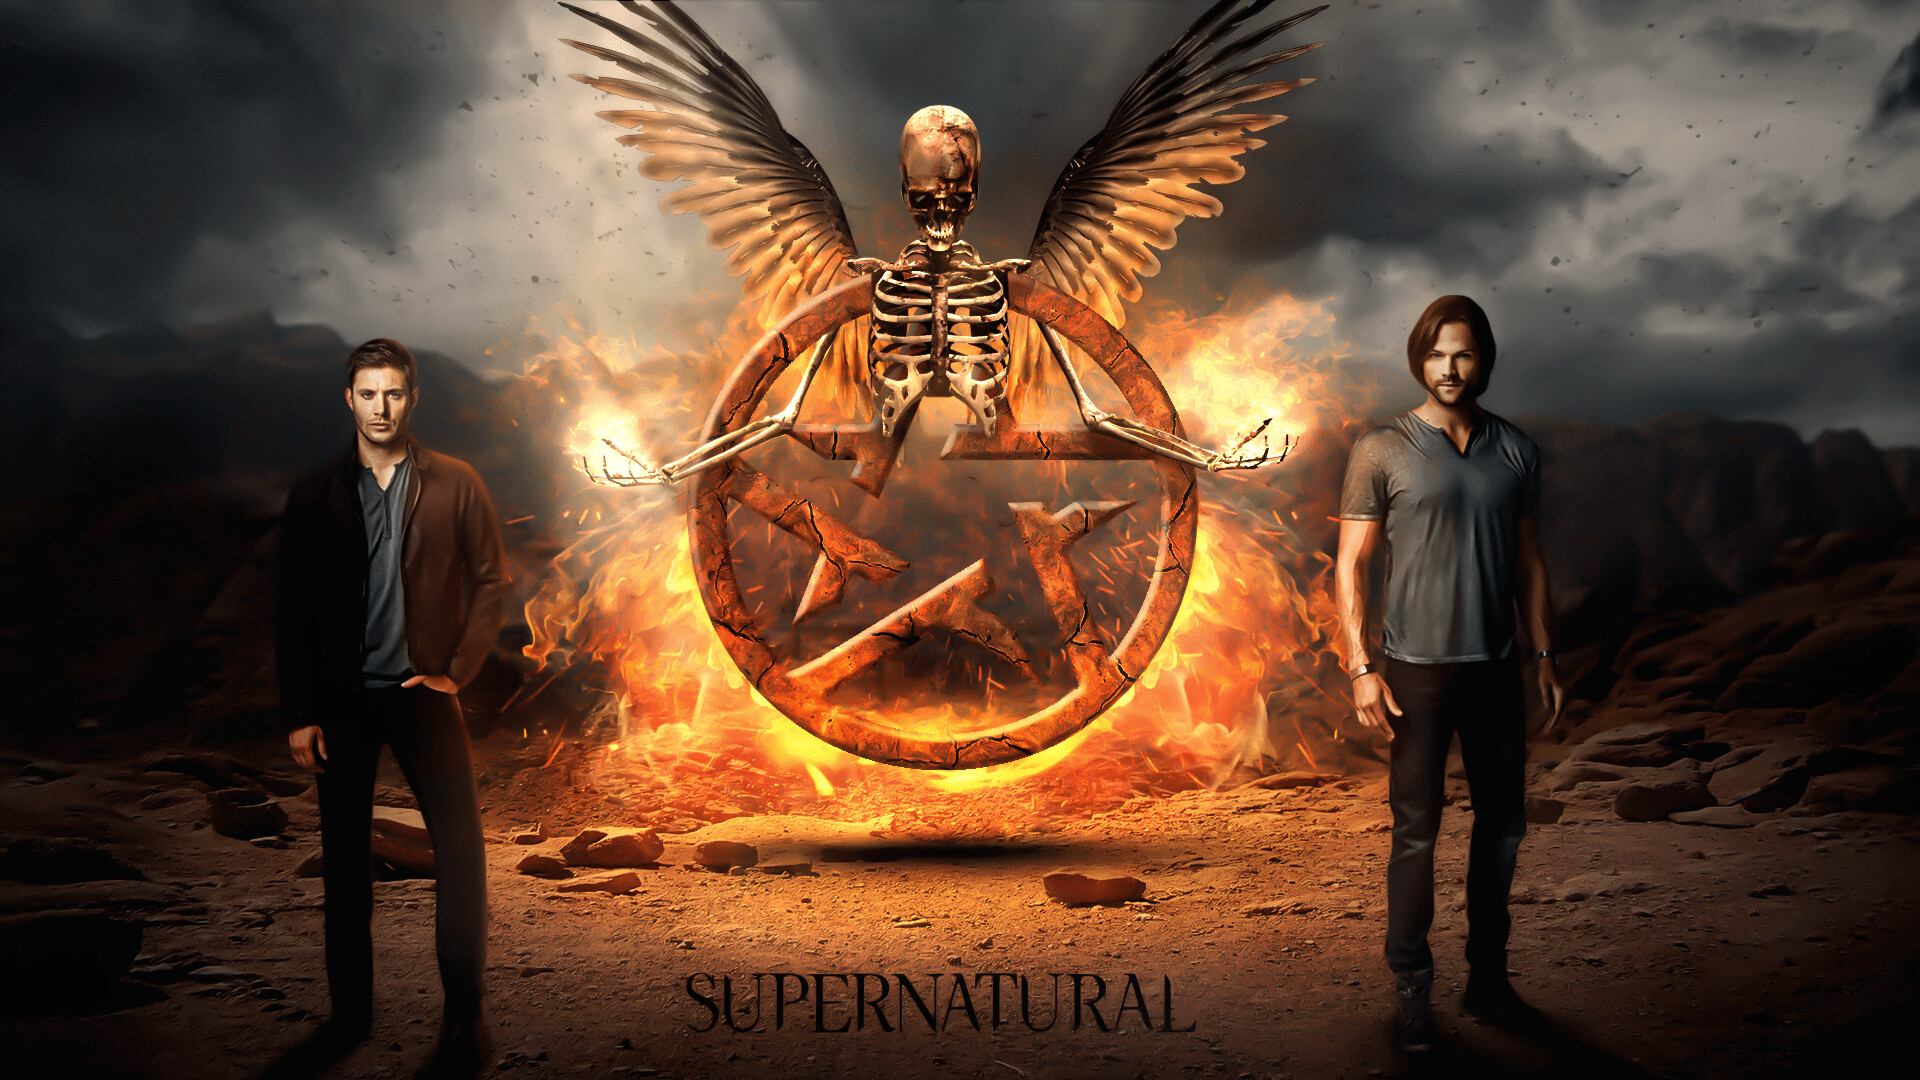 Supernatural: The CW's American fantasy television series, Monster hunters. 1920x1080 Full HD Background.